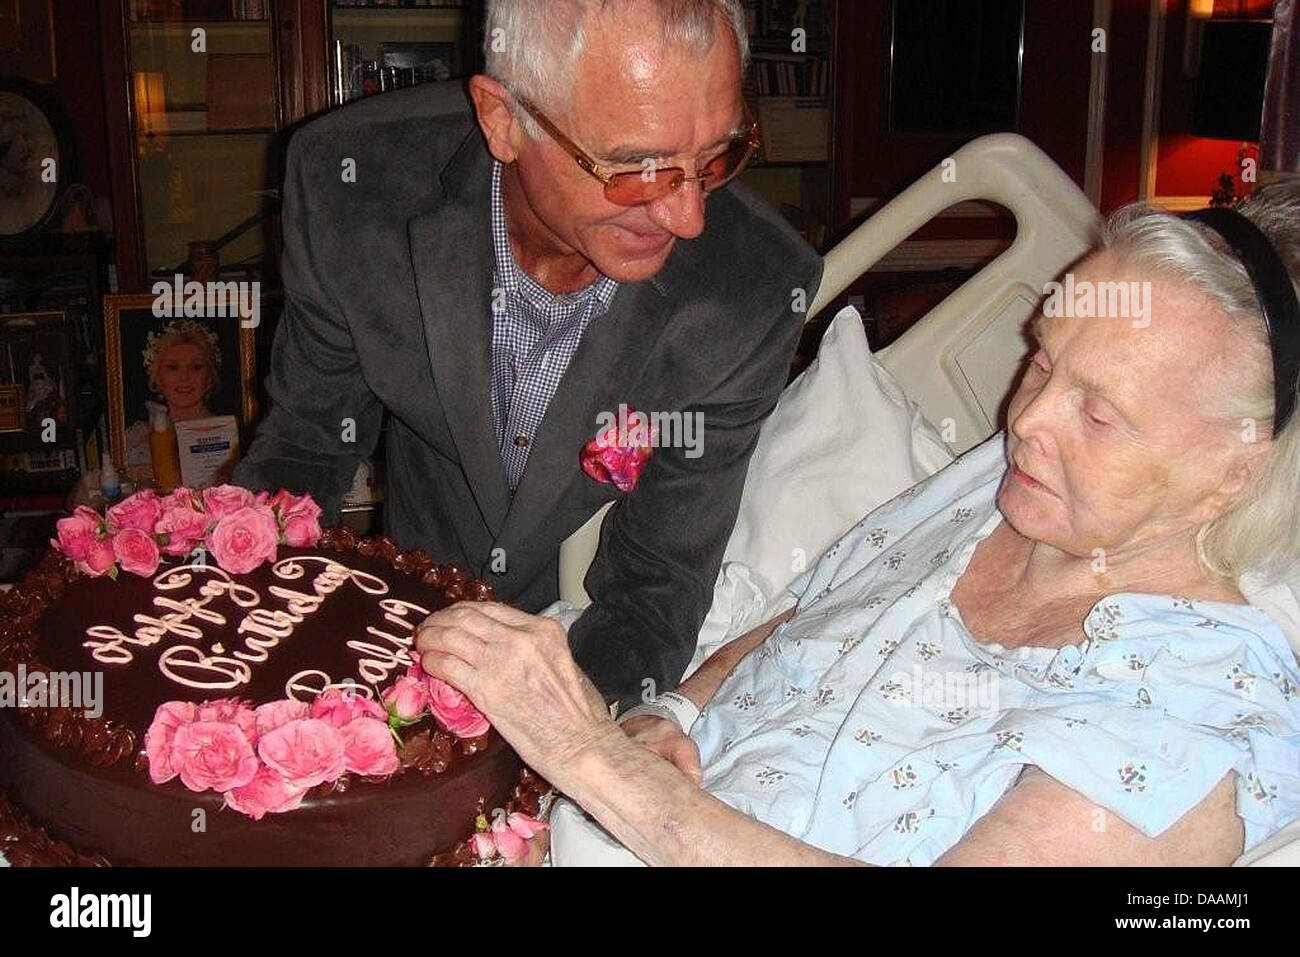 Frederic Prinz von Anhalt delivers a birthday cake to his 94-year-old wife Zsa Zsa Gabor their home Angeles, Germany, 06 February 2011. Photo: Privat Stock Photo Alamy